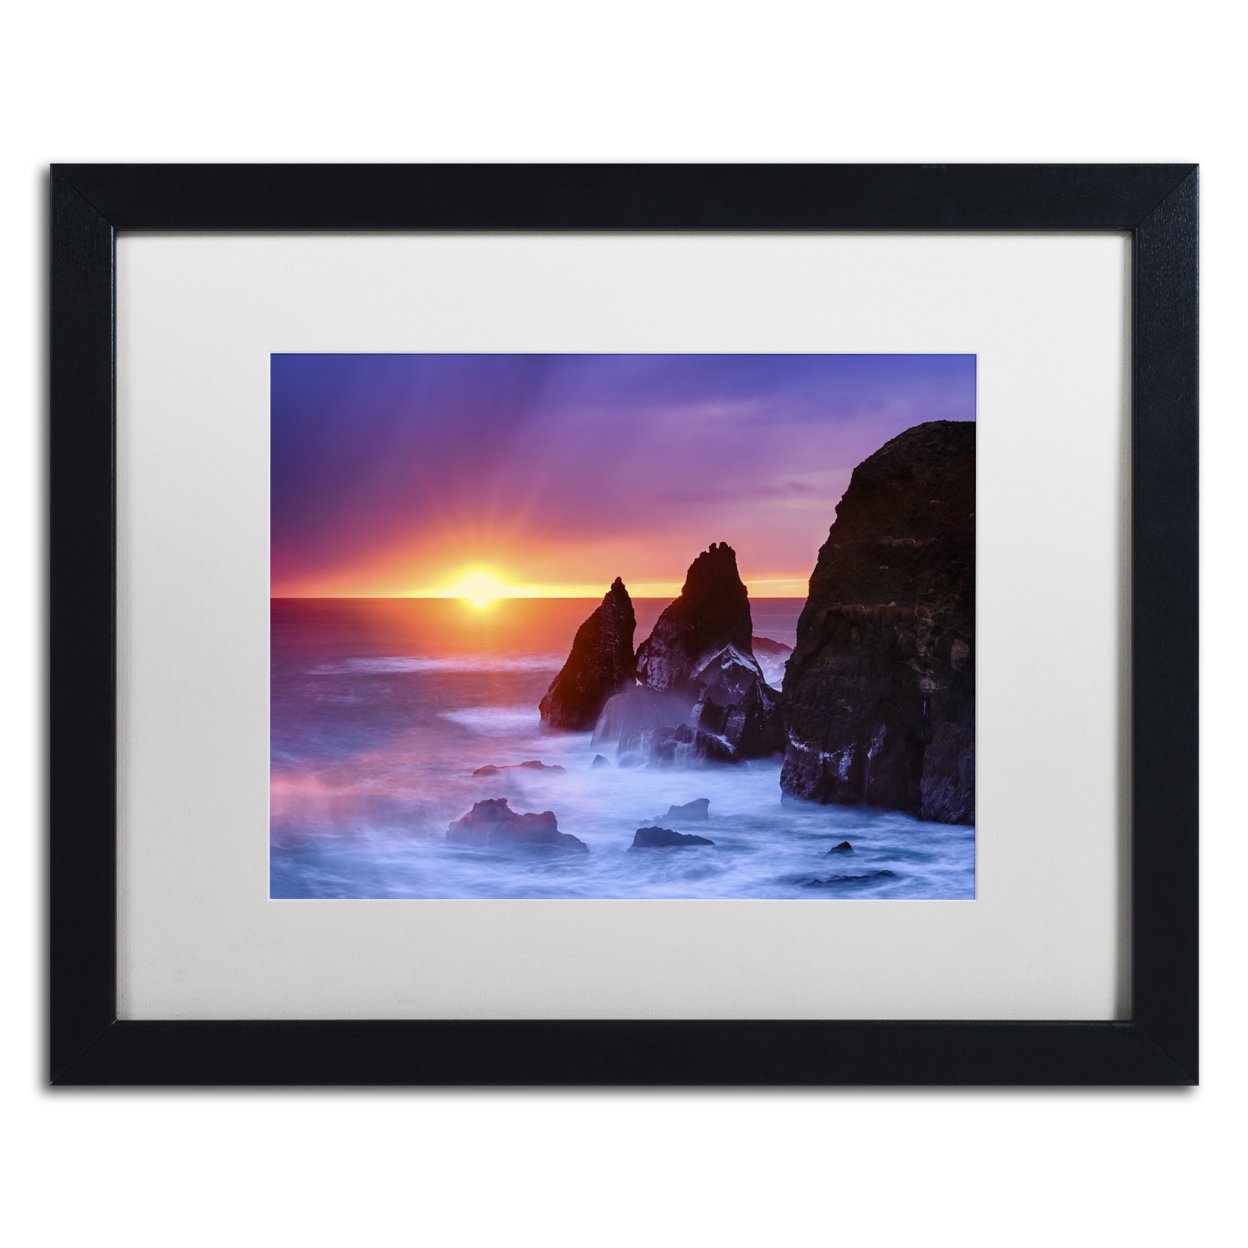 Michael Blanchette Photography 'Eye Of The Sun' Black Wooden Framed Art 18 X 22 Inches